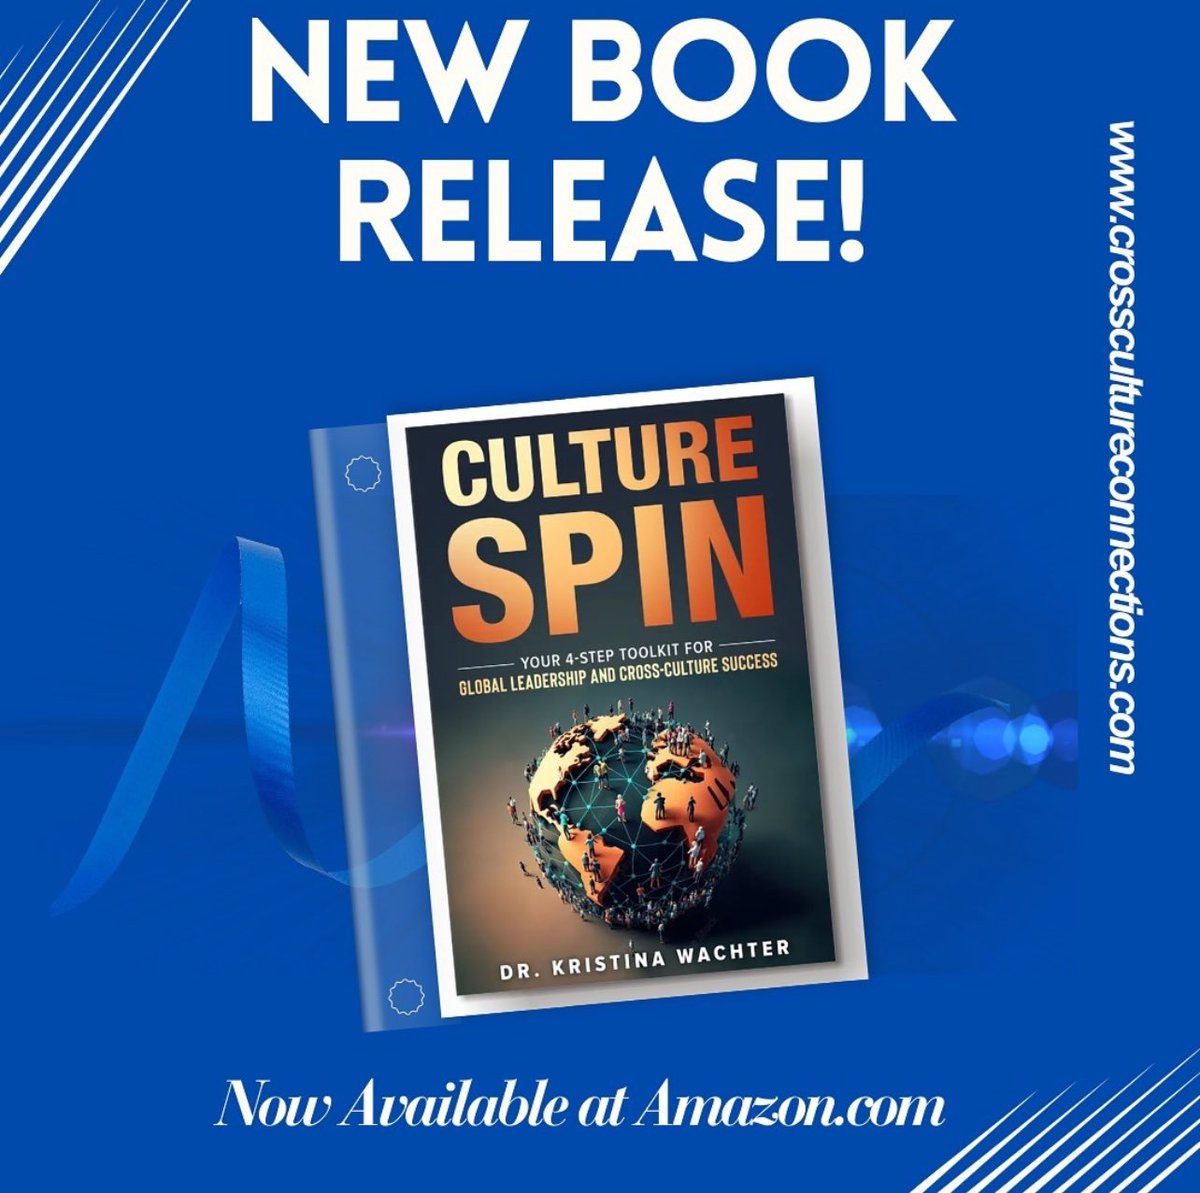 #EXCITING news! The #CrossCultureConnections team is delighted to announce that the #CultureSPINMethod guide is now officially available on #amazon! Don’t miss your #opportunity to own the #premier guide to #global leadership! Visit crosscultureconnections.com for more information!